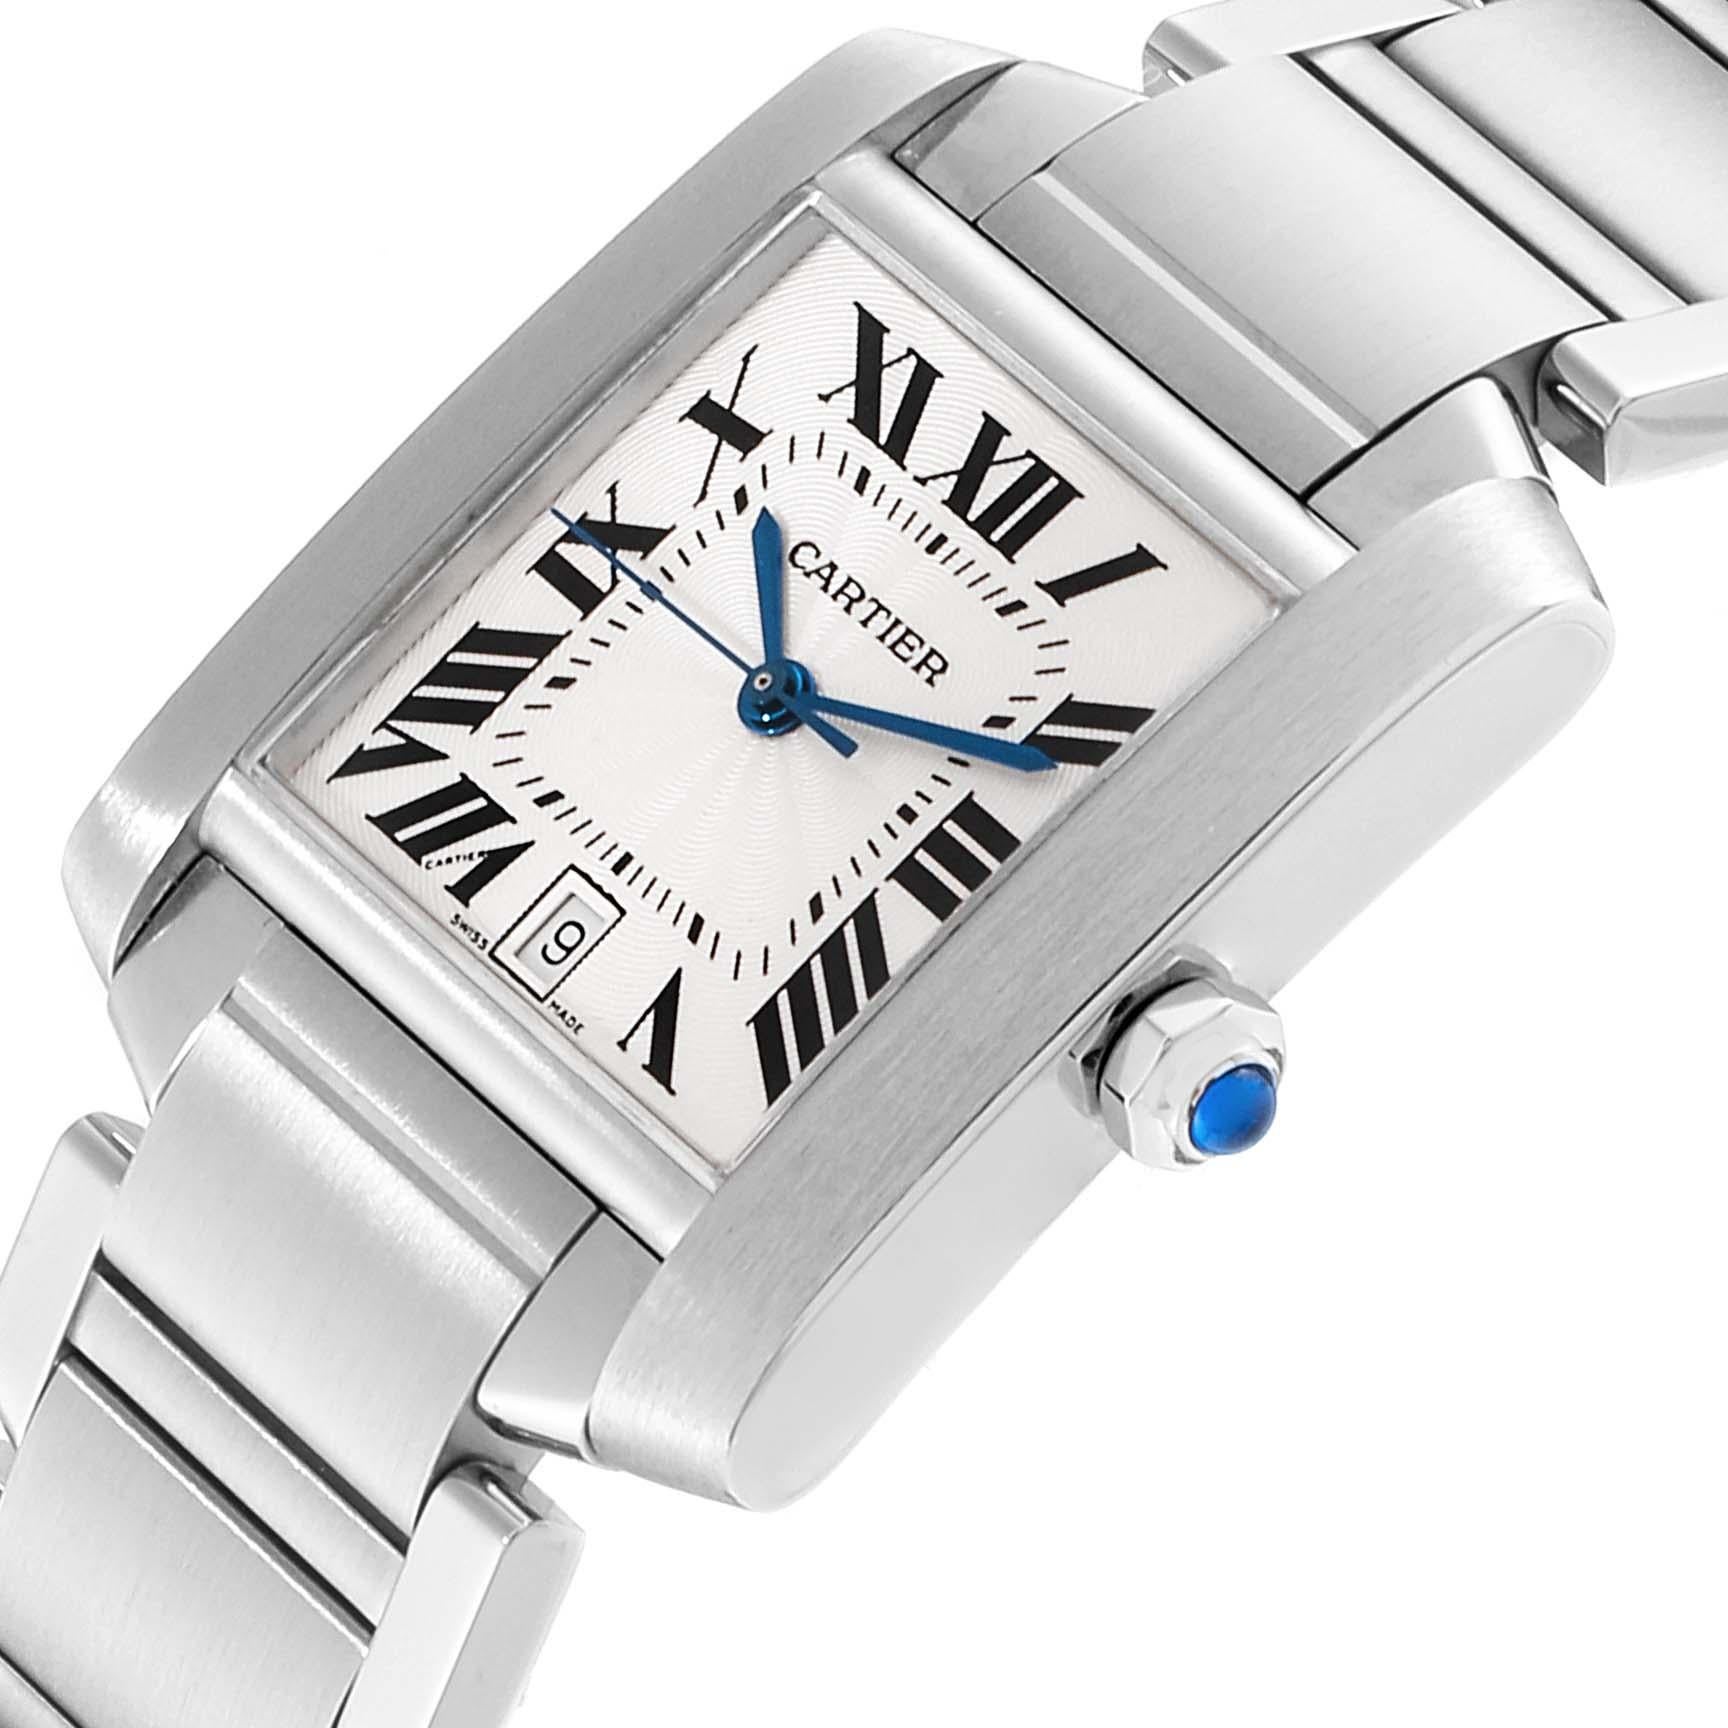 Cartier Tank Francaise Silver Dial Automatic Steel Men's Watch W51002Q3 For Sale 2